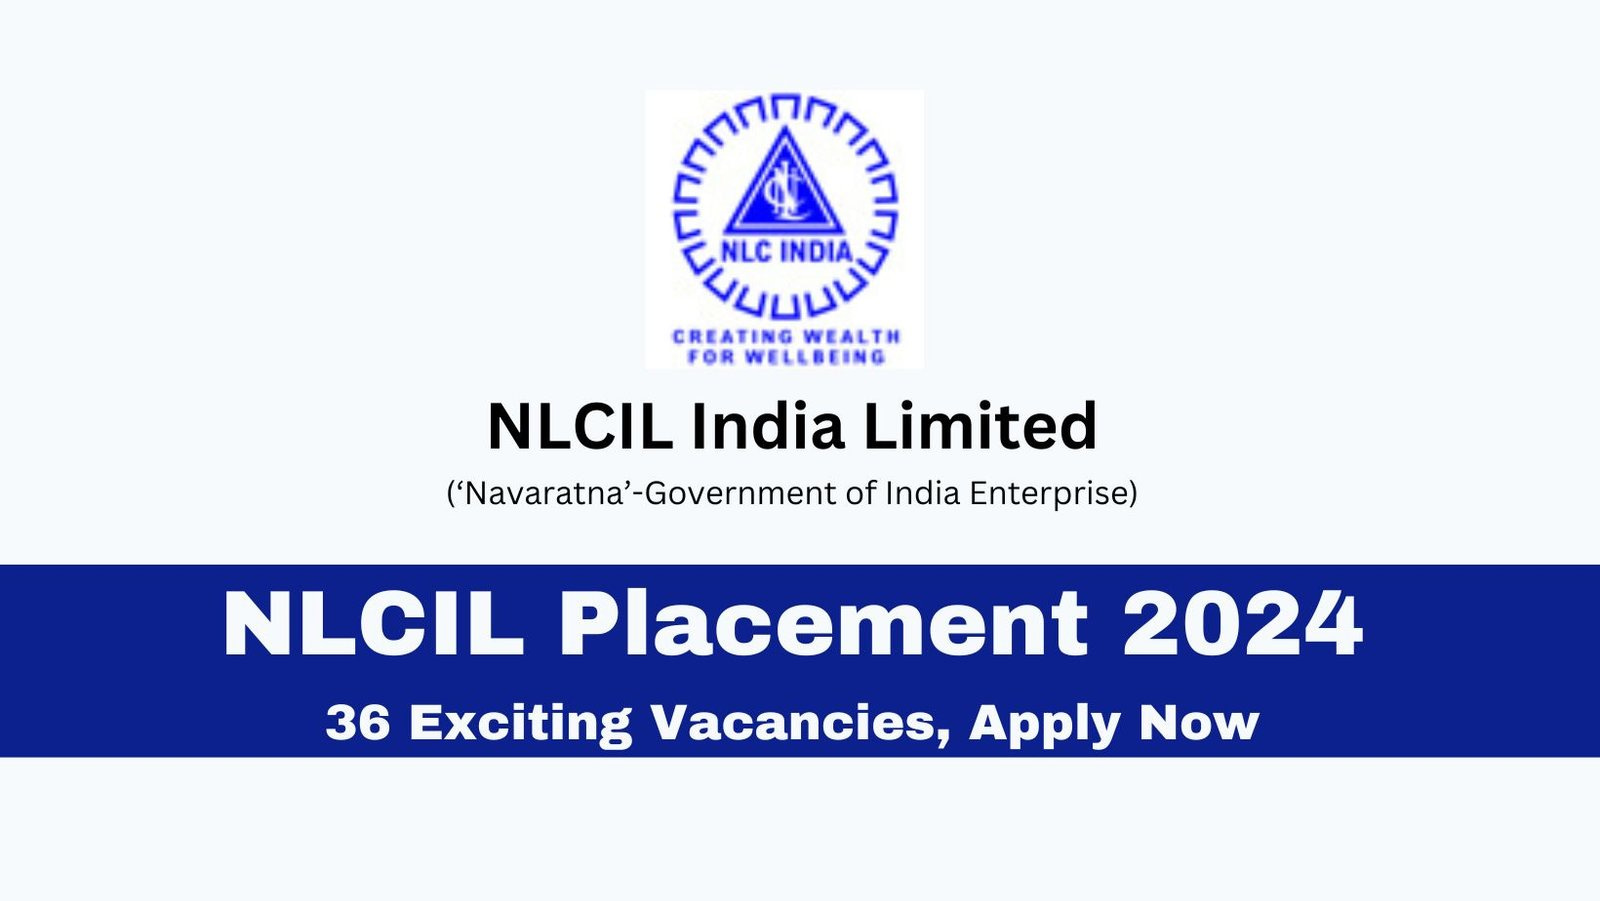 NLCIL Placement 2024